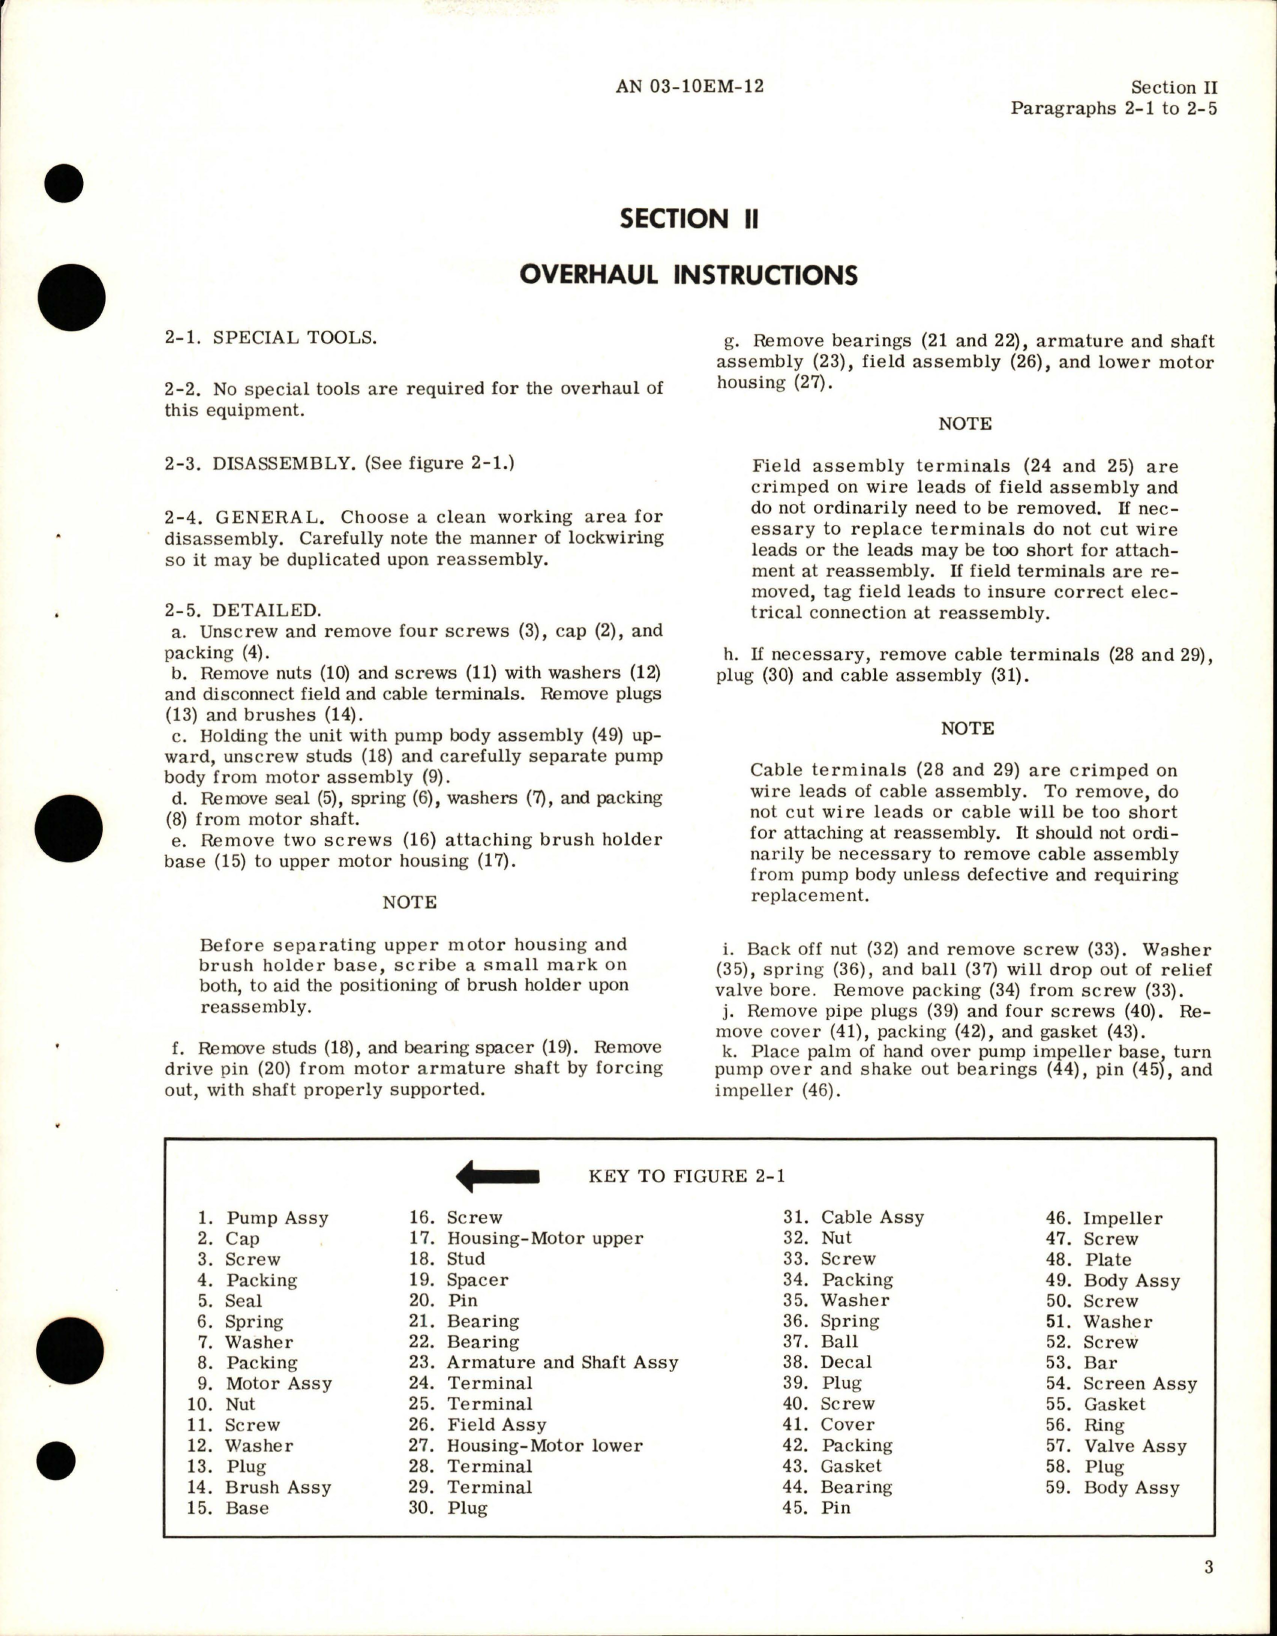 Sample page 7 from AirCorps Library document: Overhaul Instructions for Submerged Fuel Boost Pump